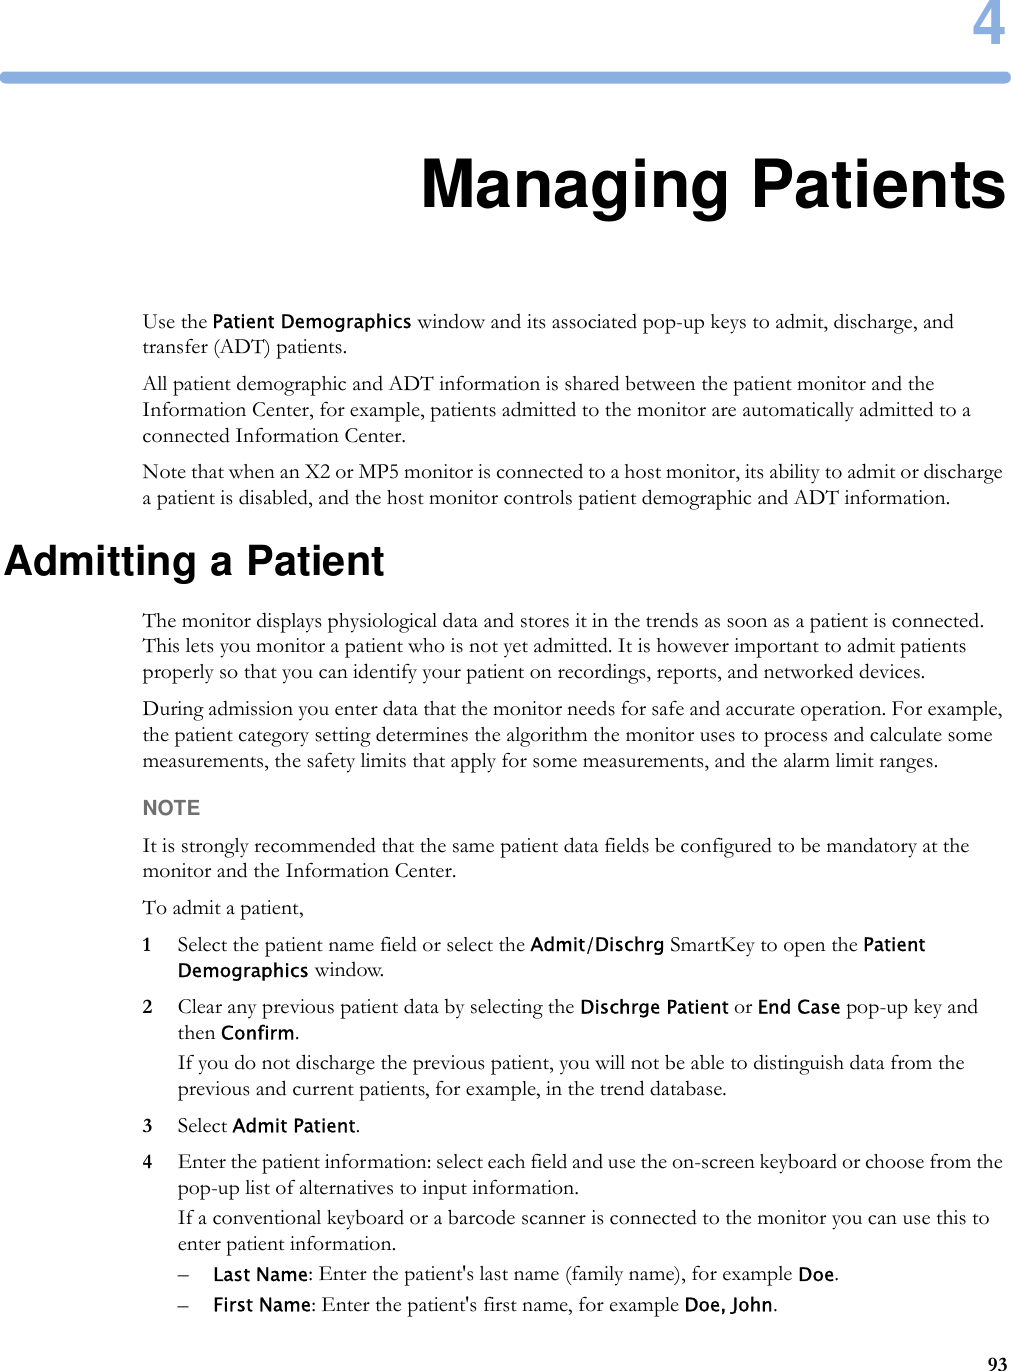 4934Managing PatientsUse the Patient Demographics window and its associated pop-up keys to admit, discharge, and transfer (ADT) patients.All patient demographic and ADT information is shared between the patient monitor and the Information Center, for example, patients admitted to the monitor are automatically admitted to a connected Information Center.Note that when an X2 or MP5 monitor is connected to a host monitor, its ability to admit or discharge a patient is disabled, and the host monitor controls patient demographic and ADT information.Admitting a PatientThe monitor displays physiological data and stores it in the trends as soon as a patient is connected. This lets you monitor a patient who is not yet admitted. It is however important to admit patients properly so that you can identify your patient on recordings, reports, and networked devices.During admission you enter data that the monitor needs for safe and accurate operation. For example, the patient category setting determines the algorithm the monitor uses to process and calculate some measurements, the safety limits that apply for some measurements, and the alarm limit ranges.NOTEIt is strongly recommended that the same patient data fields be configured to be mandatory at the monitor and the Information Center.To admit a patient,1Select the patient name field or select the Admit/Dischrg SmartKey to open the Patient Demographics window.2Clear any previous patient data by selecting the Dischrge Patient or End Case pop-up key and then Confirm.If you do not discharge the previous patient, you will not be able to distinguish data from the previous and current patients, for example, in the trend database.3Select Admit Patient.4Enter the patient information: select each field and use the on-screen keyboard or choose from the pop-up list of alternatives to input information.If a conventional keyboard or a barcode scanner is connected to the monitor you can use this to enter patient information.–Last Name: Enter the patient&apos;s last name (family name), for example Doe.–First Name: Enter the patient&apos;s first name, for example Doe, John.